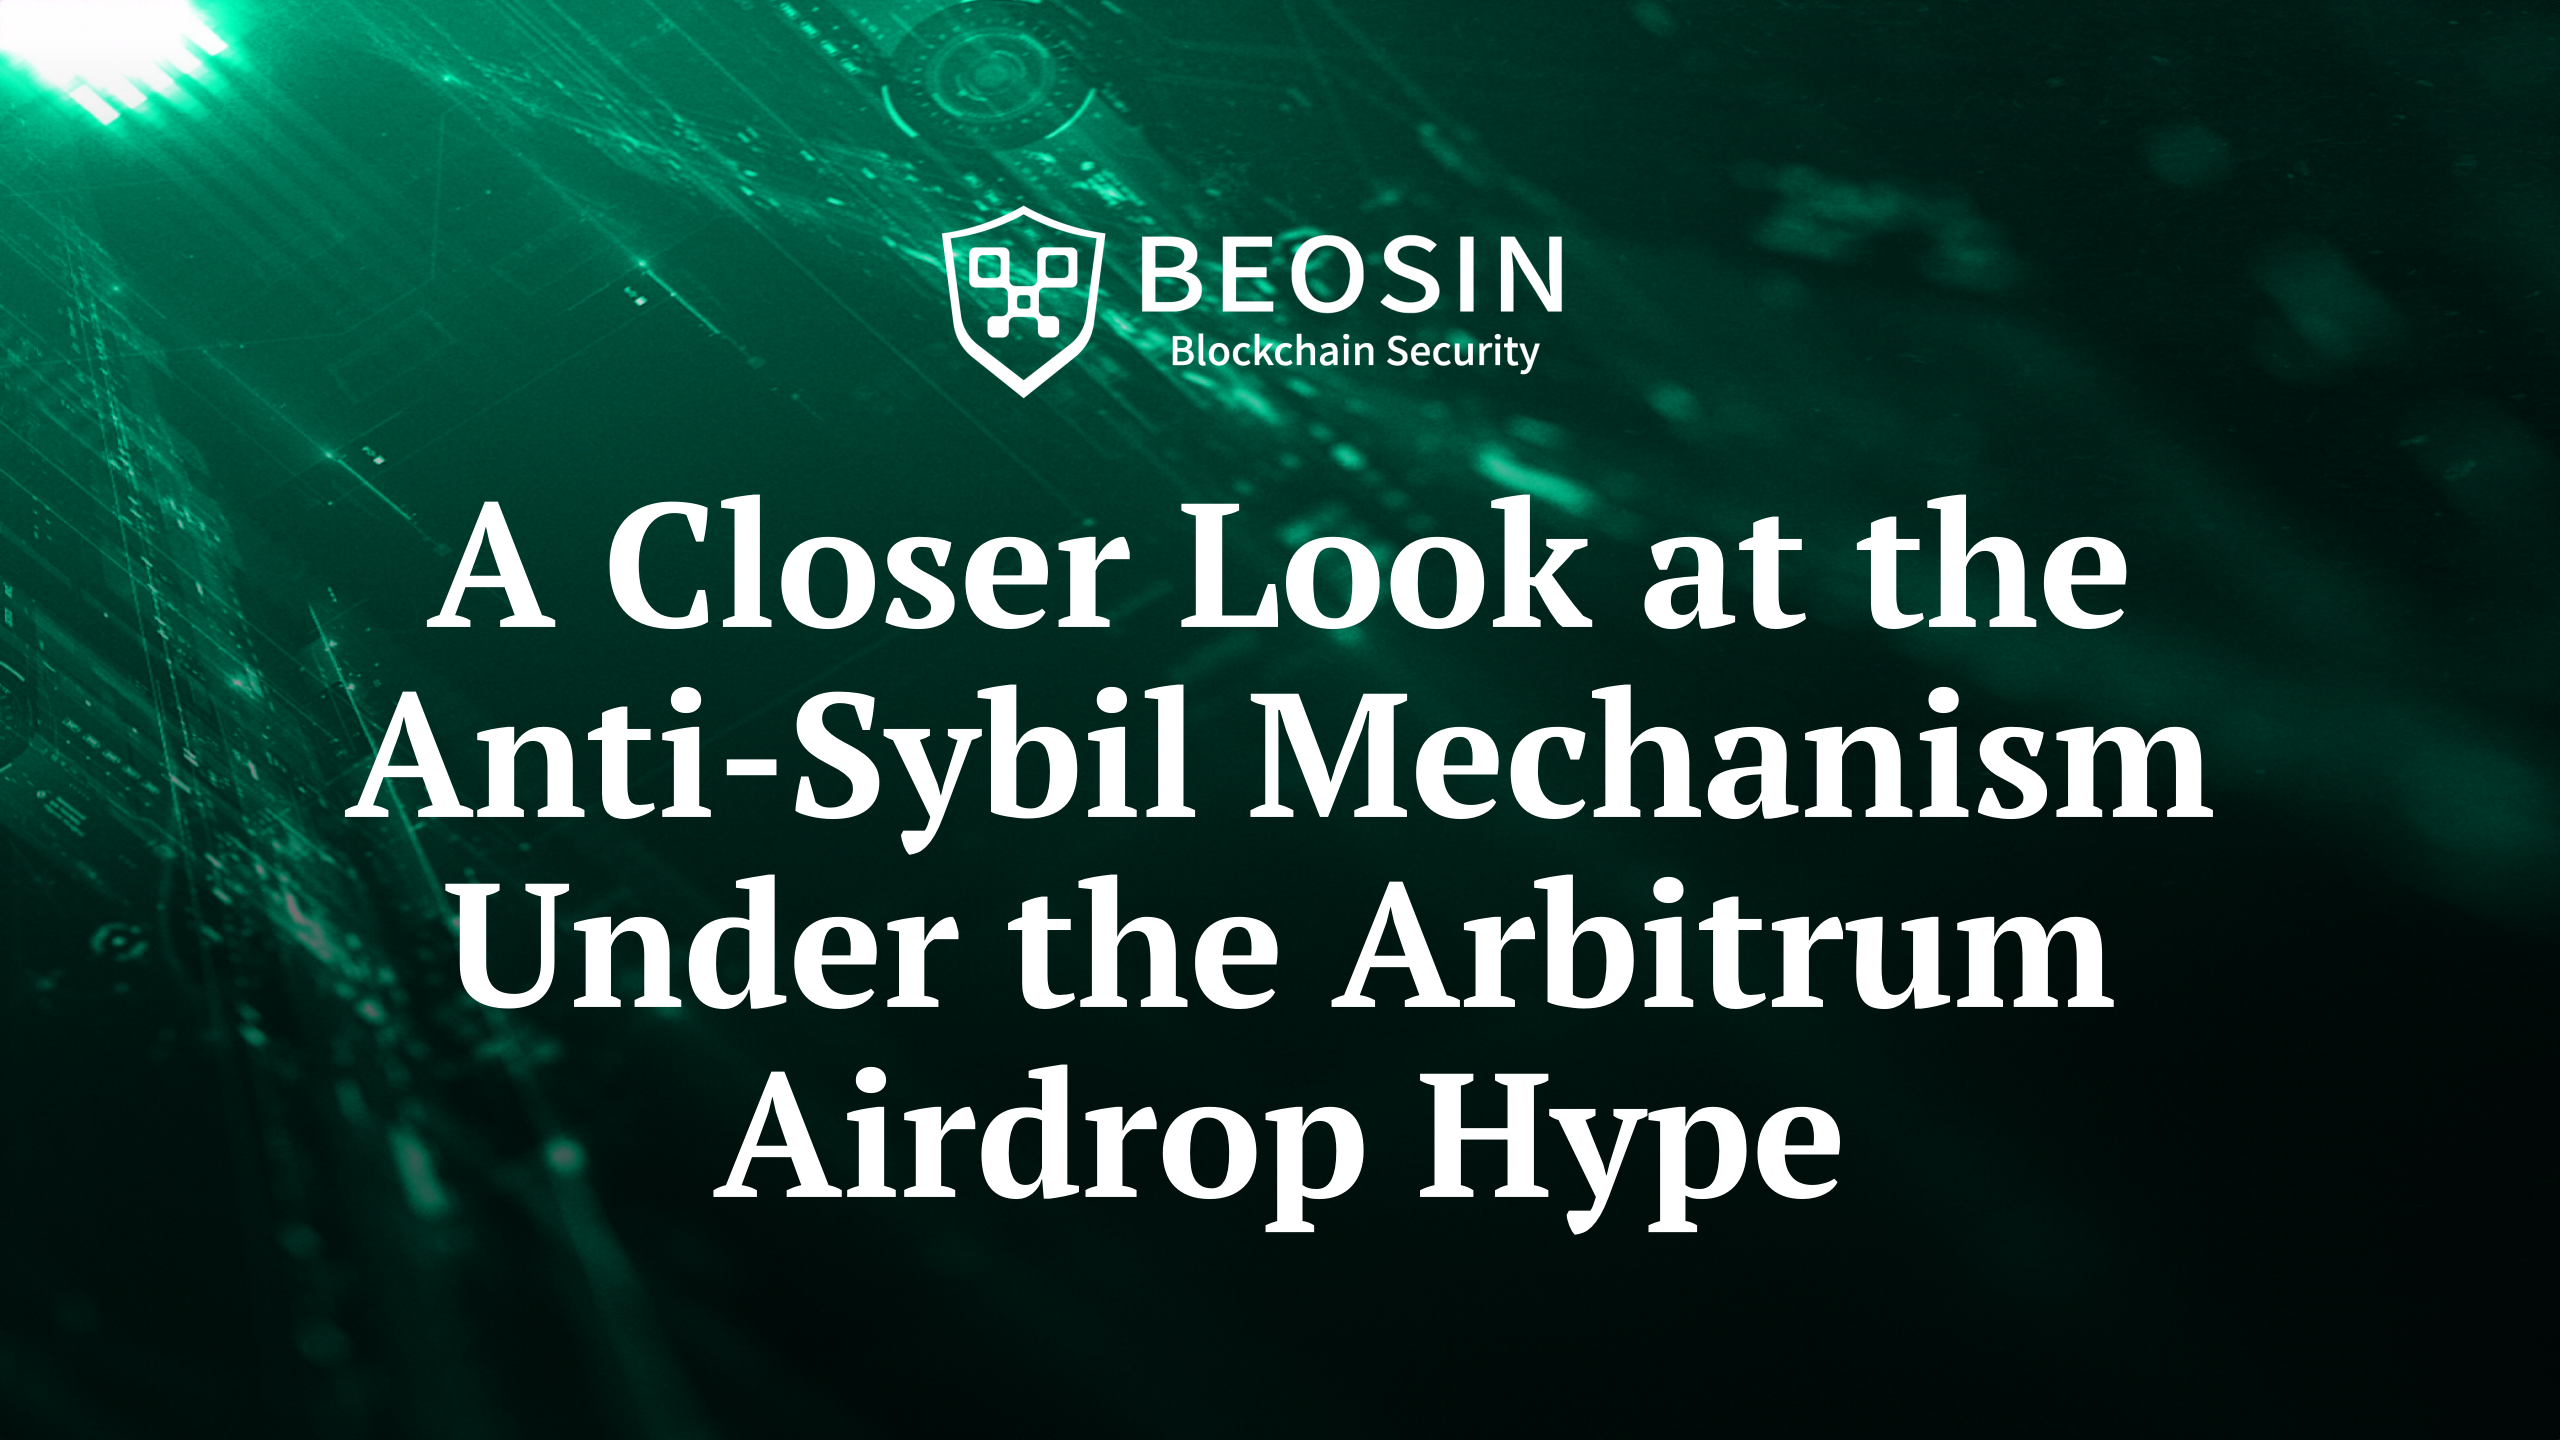 A Closer Look at the Anti-Sybil Mechanism Under the Arbitrum Airdrop Hype